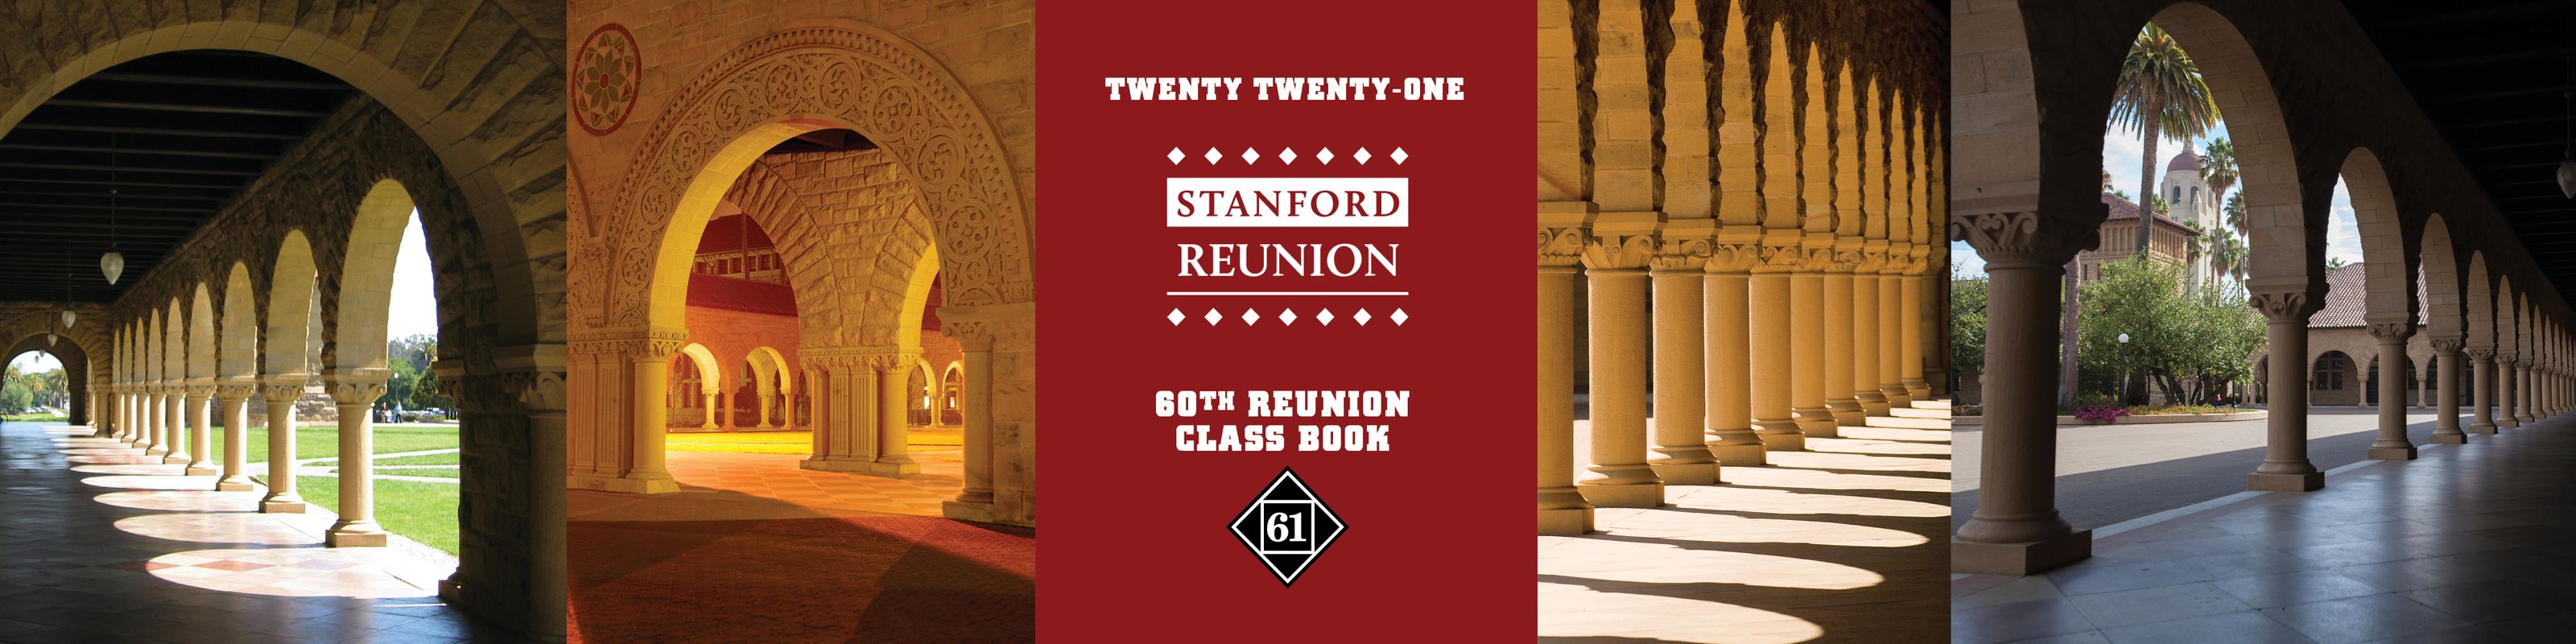 Stanford Class of 1961 - 60th Reunion